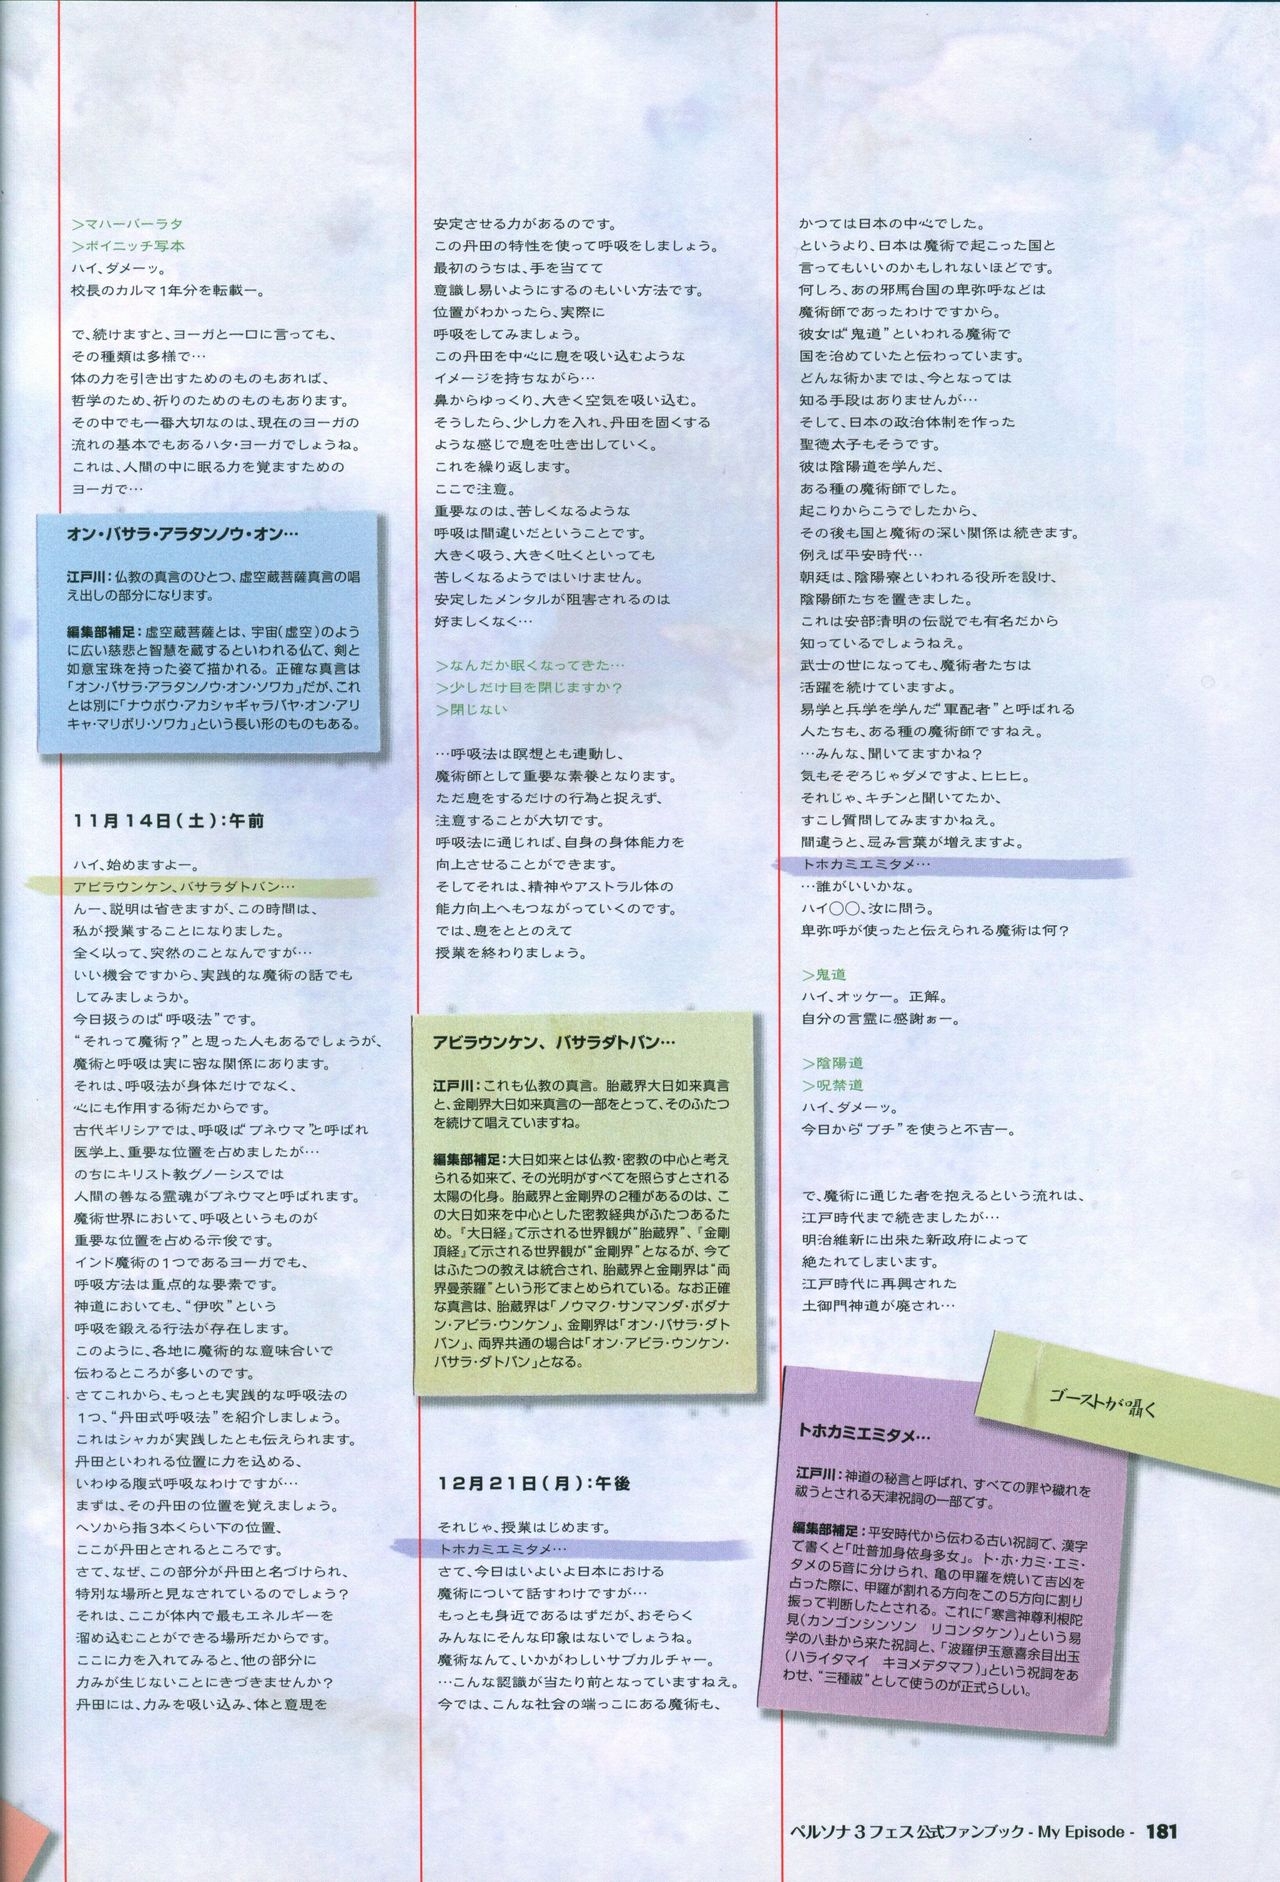 Persona 3 Fes Official Fan Book -My Episode- 182